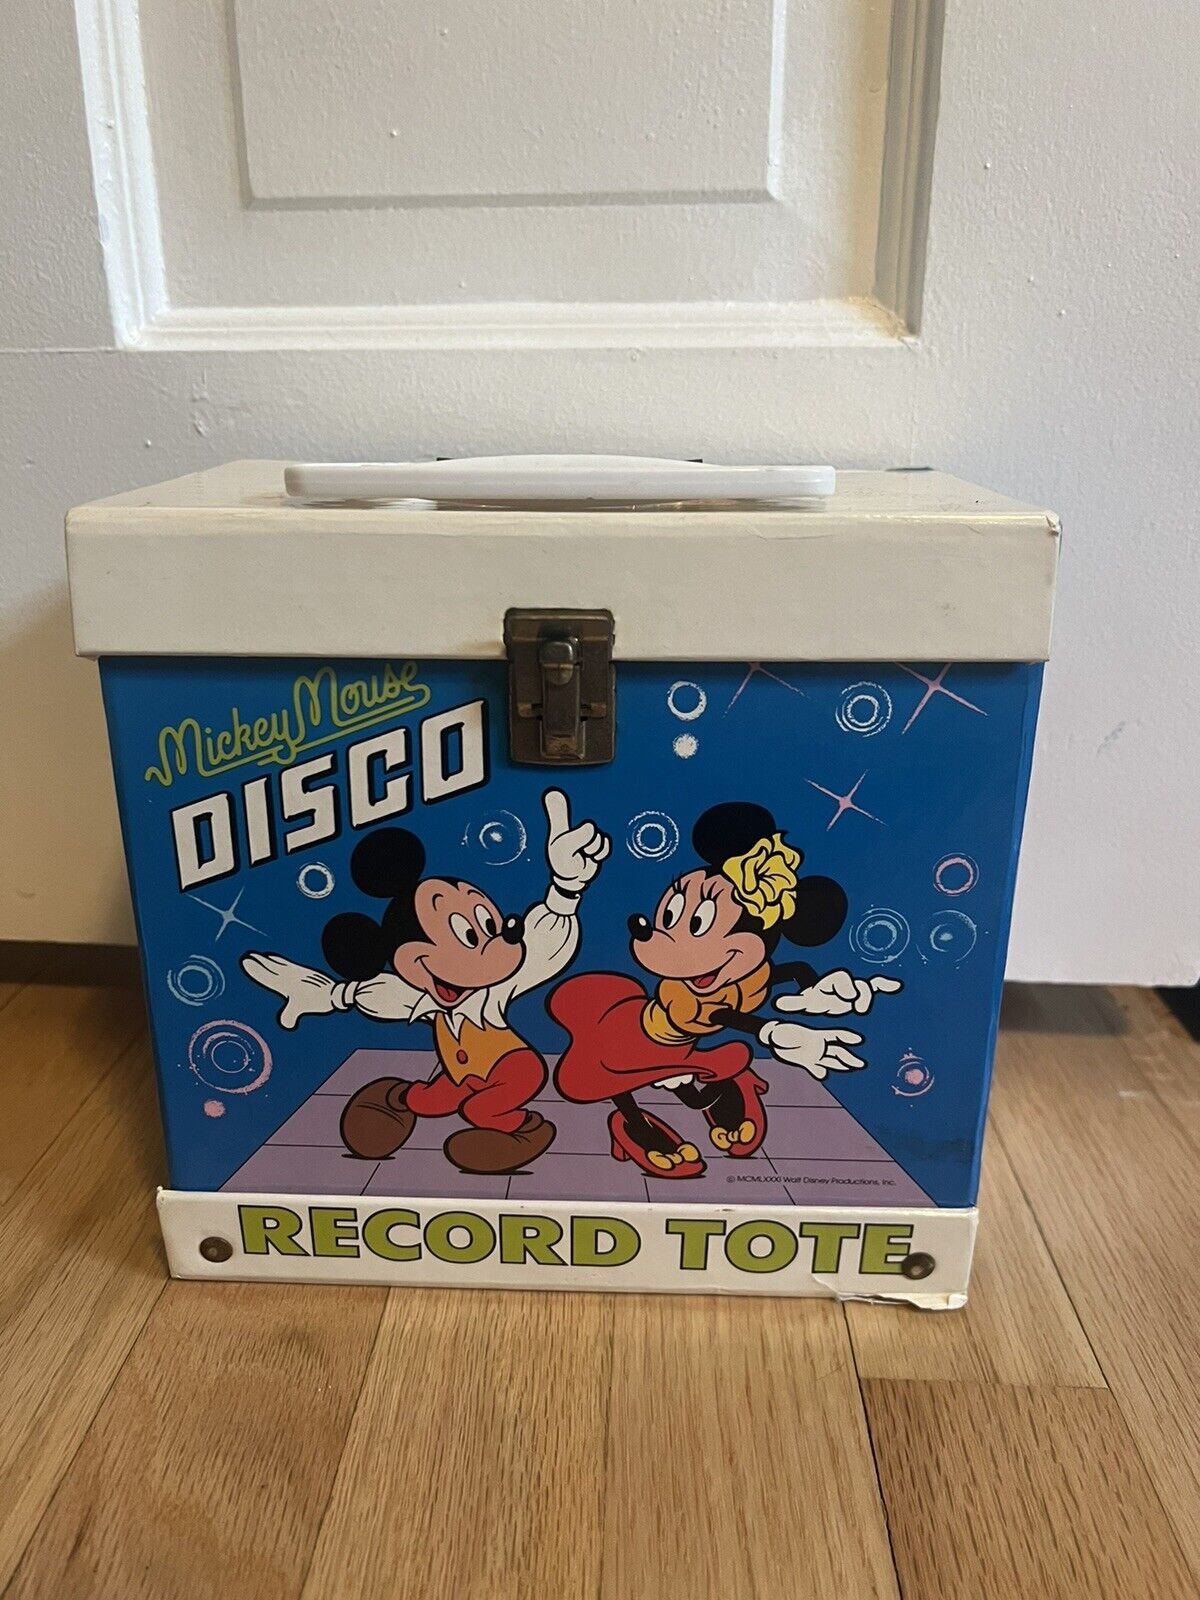 Huge VTG 33 RPM 21 Vinyl Record Lot In Mickey Mouse Disco Record Tote Barbie Etc